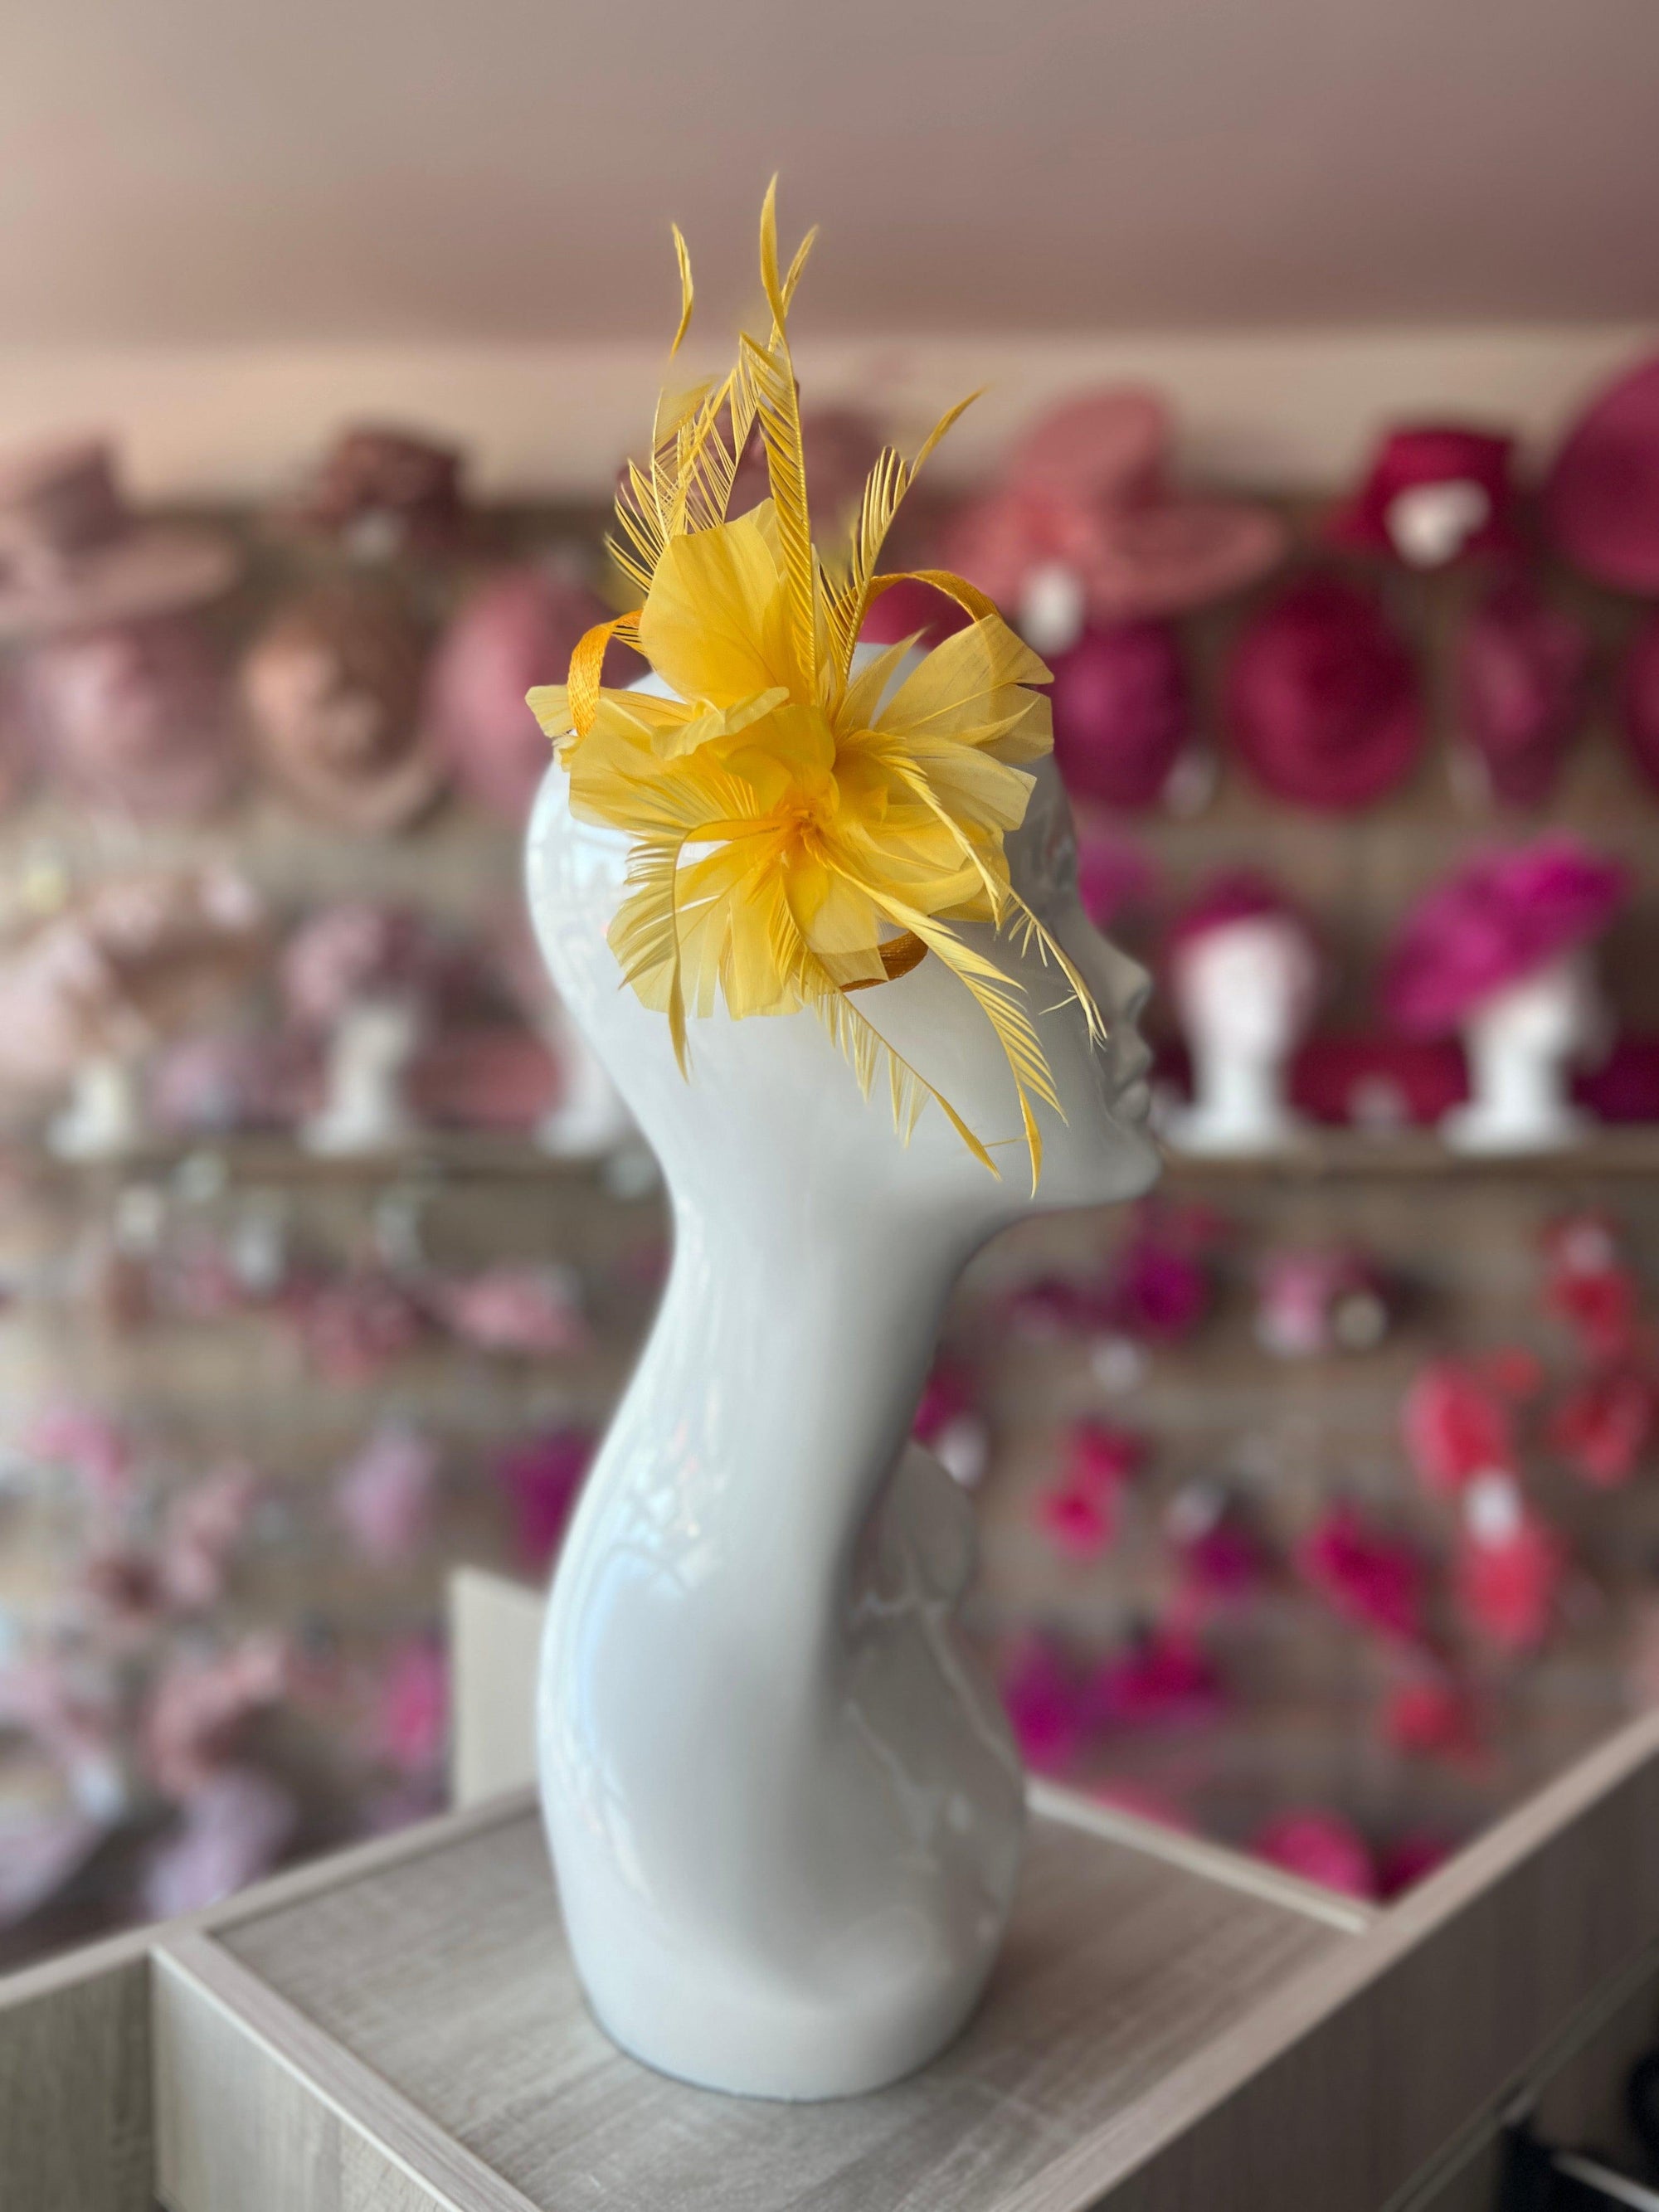 Clip On Yellow Fascinator with Loops & Feather Flower-Fascinators Direct